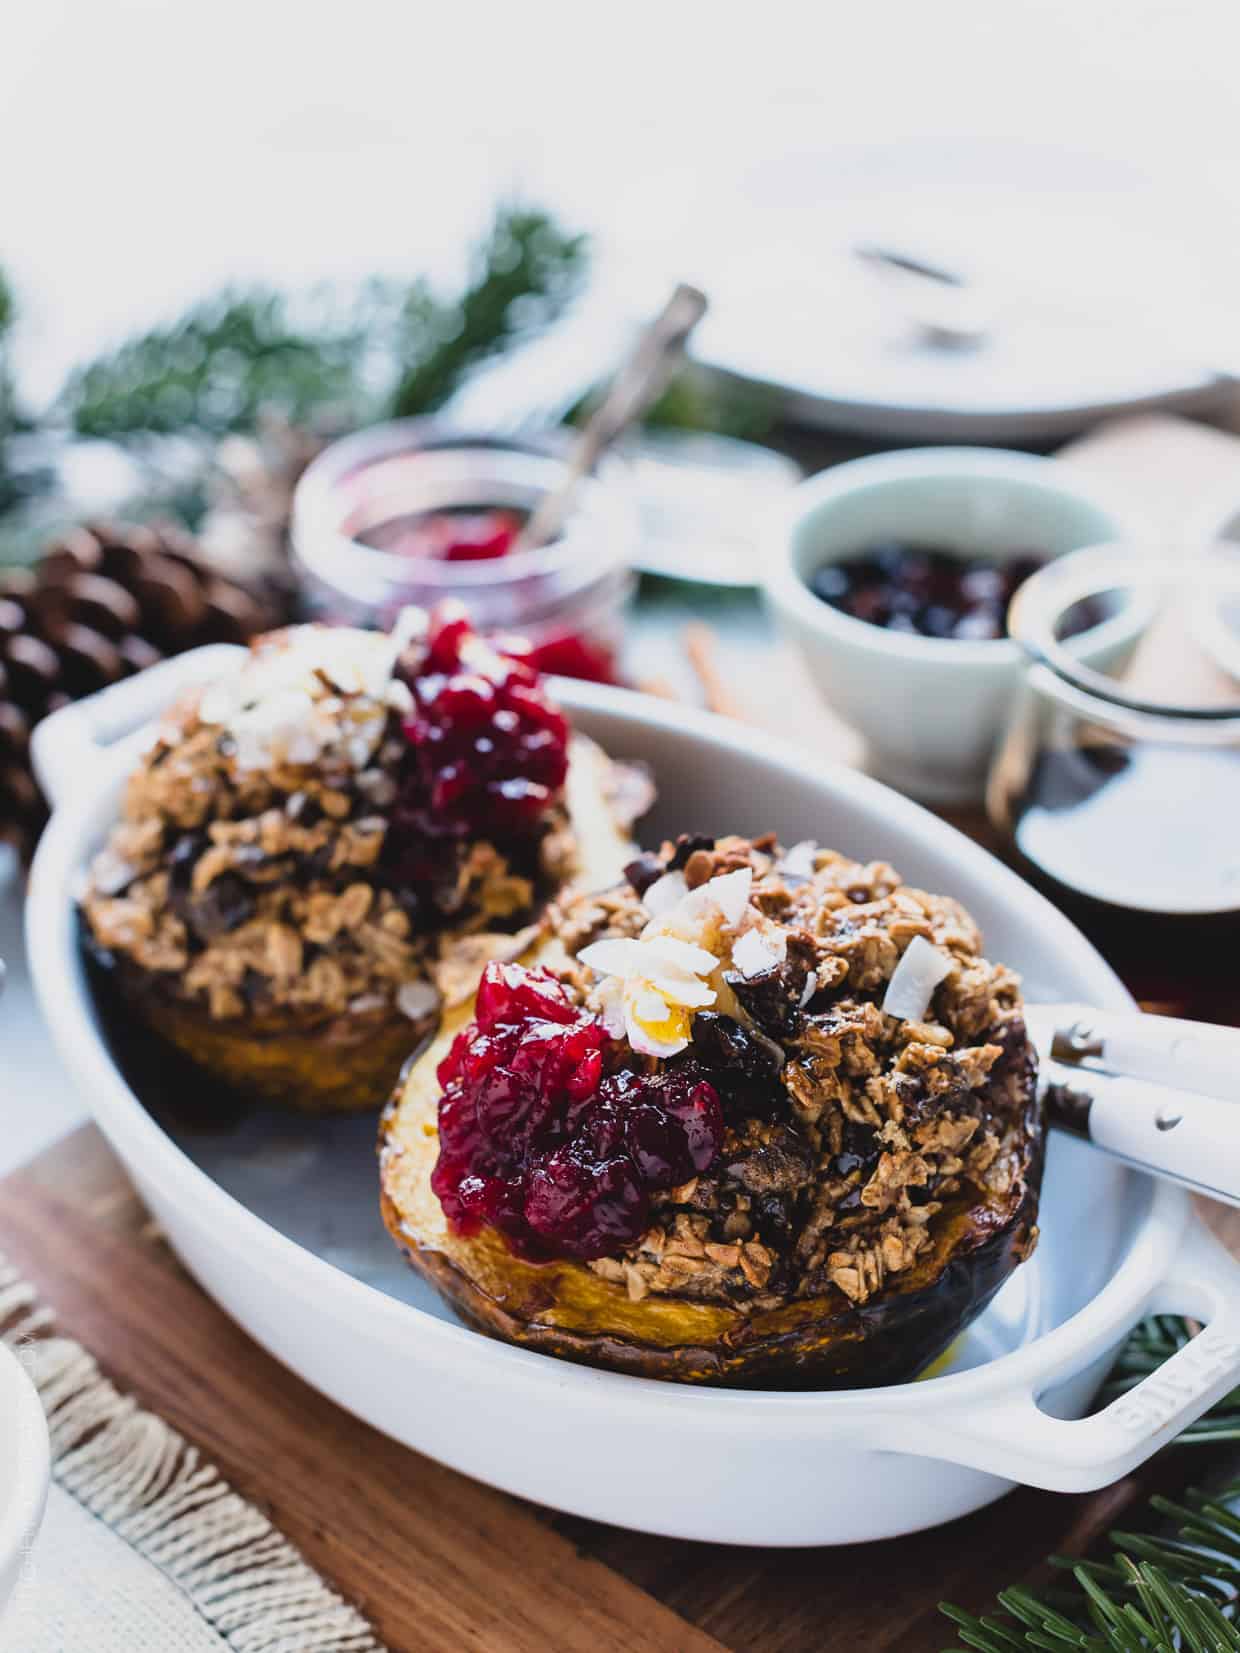 Two halves of Baked Oatmeal Stuffed Acorn Squash in a white baking dish garnished with cranberry sauce.